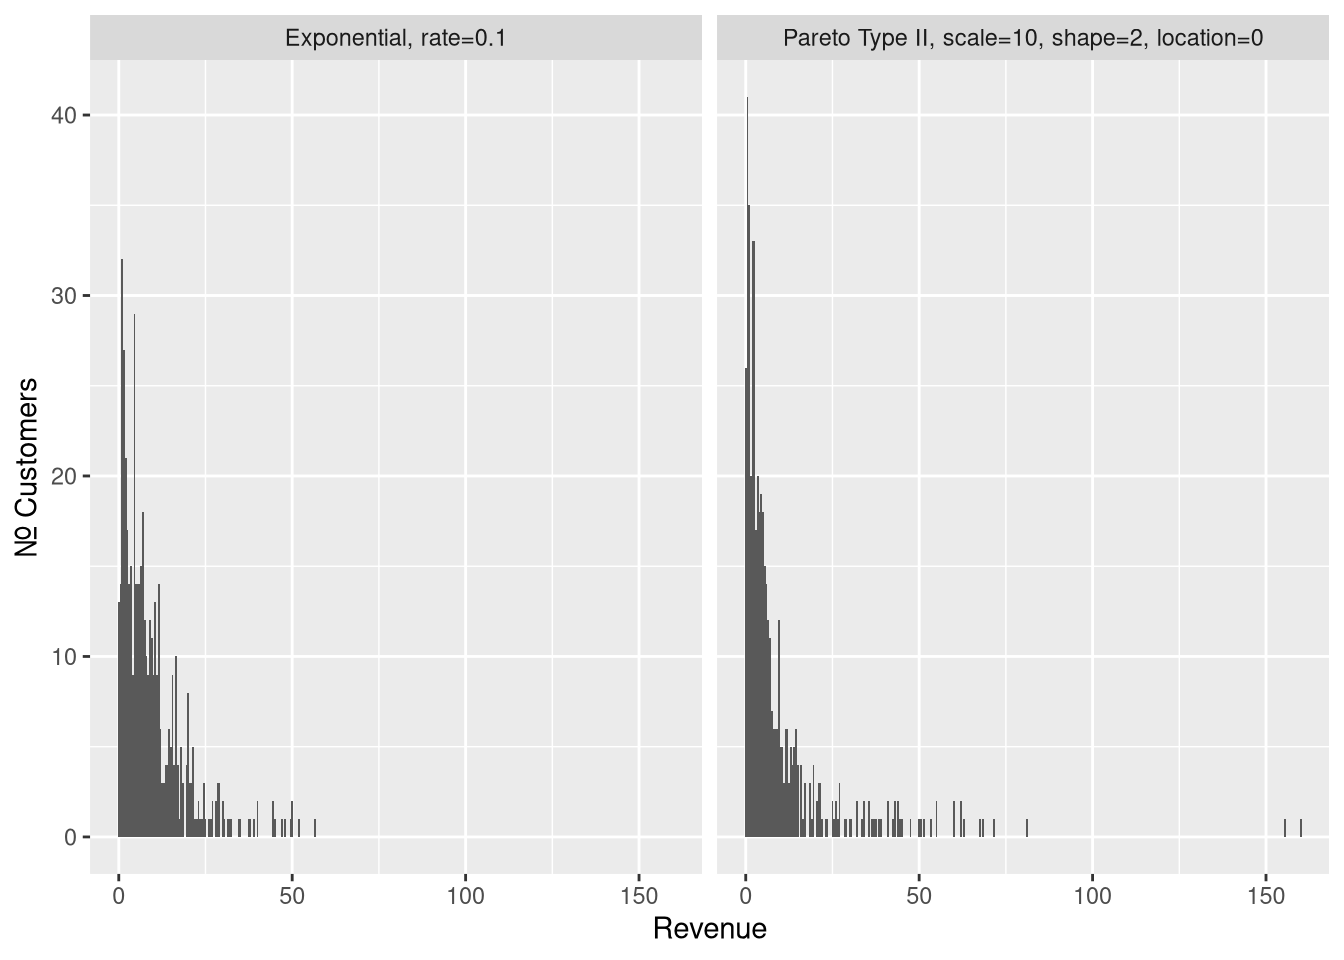 Samples ($n = 500$), from a skinny-tailed exponential on the left, and from our fat-tailed pareto distribution on the right.